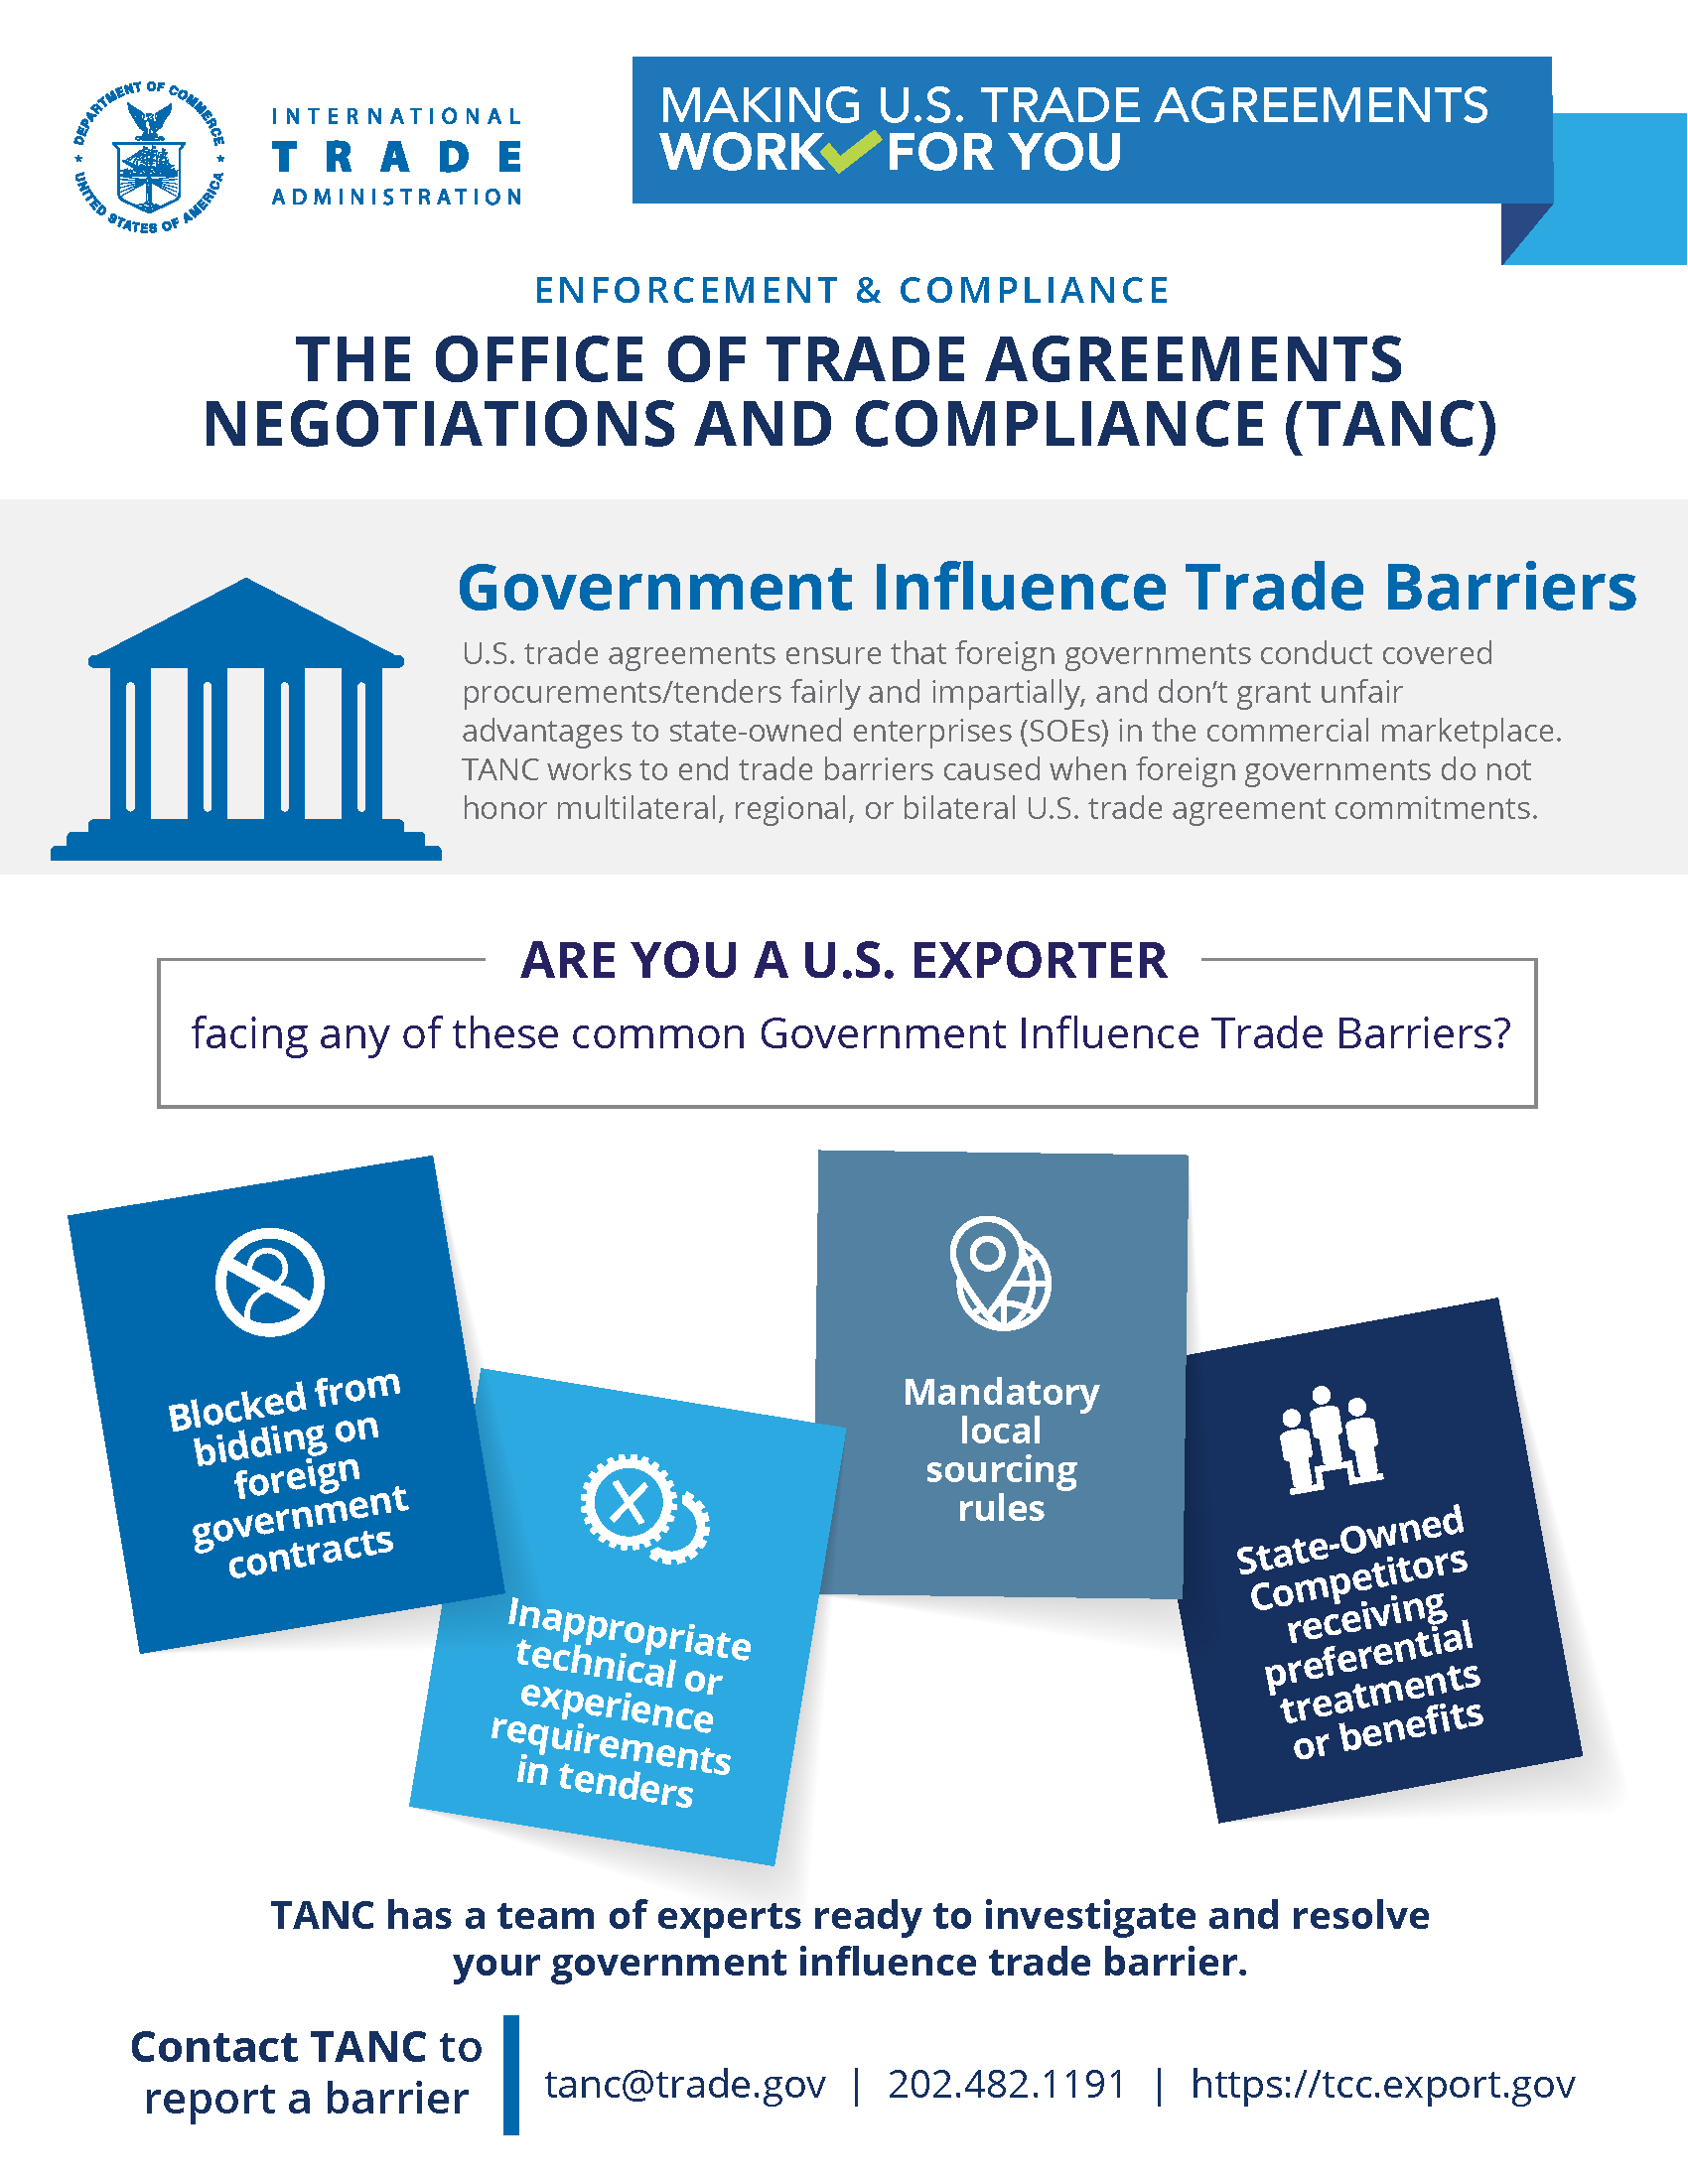 An infographic describing in plain English how to recognize when an exporter is facing a Government Influence barrier.